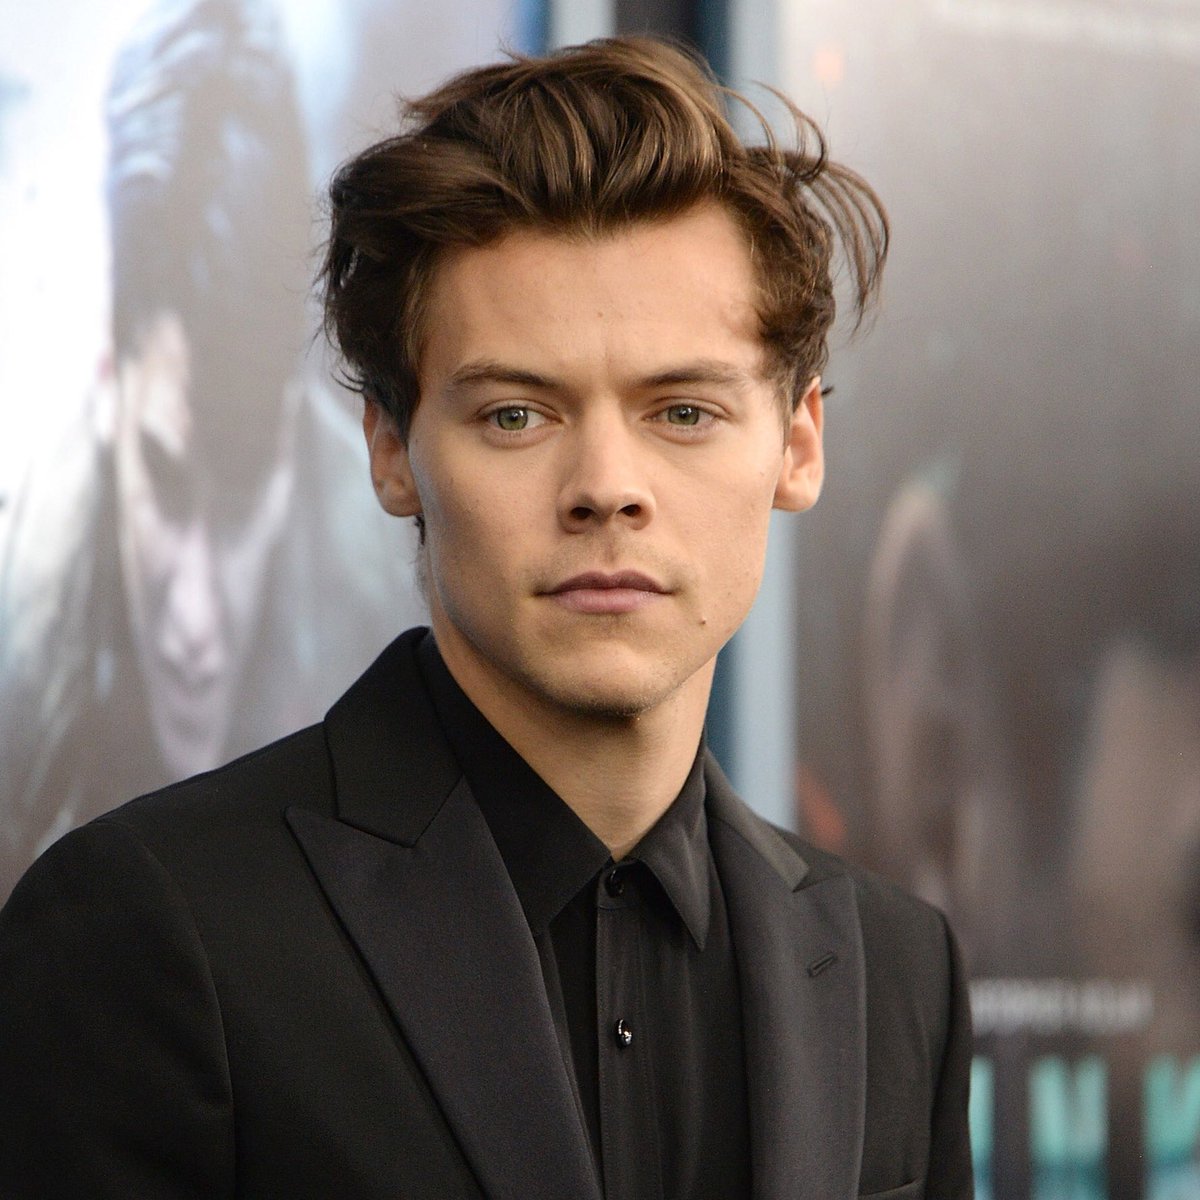 Harry Styles auditioned for and got the part of Prince Eric in Disney’s live action The Little Mermaid remake but ended up turning it down for undisclosed reasons. Jonah Hauer-King was eventually cast instead.